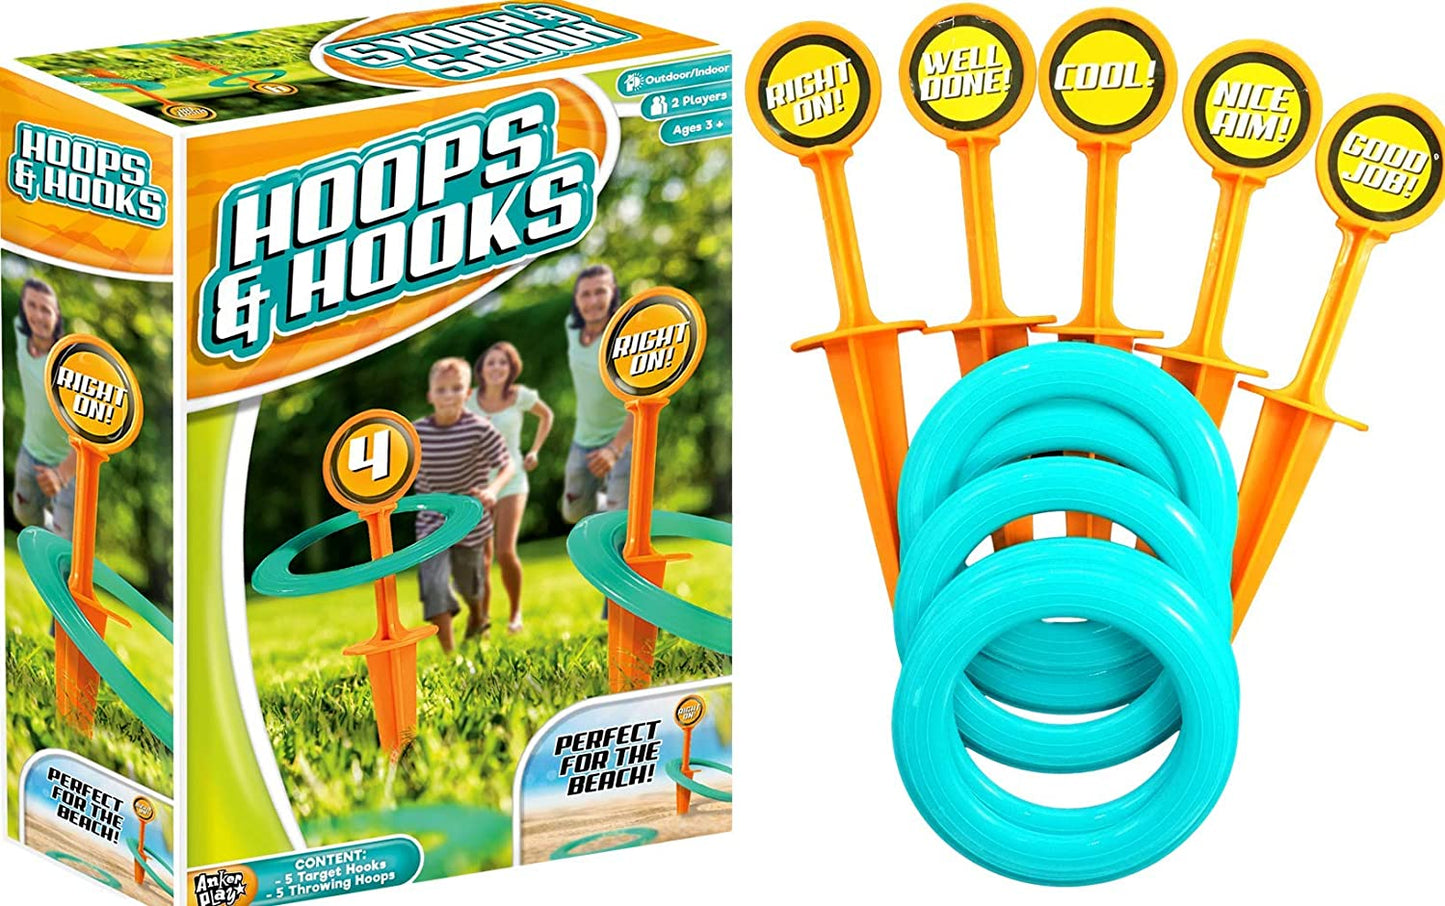 Fun a Ton Ring Toss Game for Kids and Adults Outdoor Toy Set (1 Pack) Hoop and Hooks Great Family Outdoors Game Toy